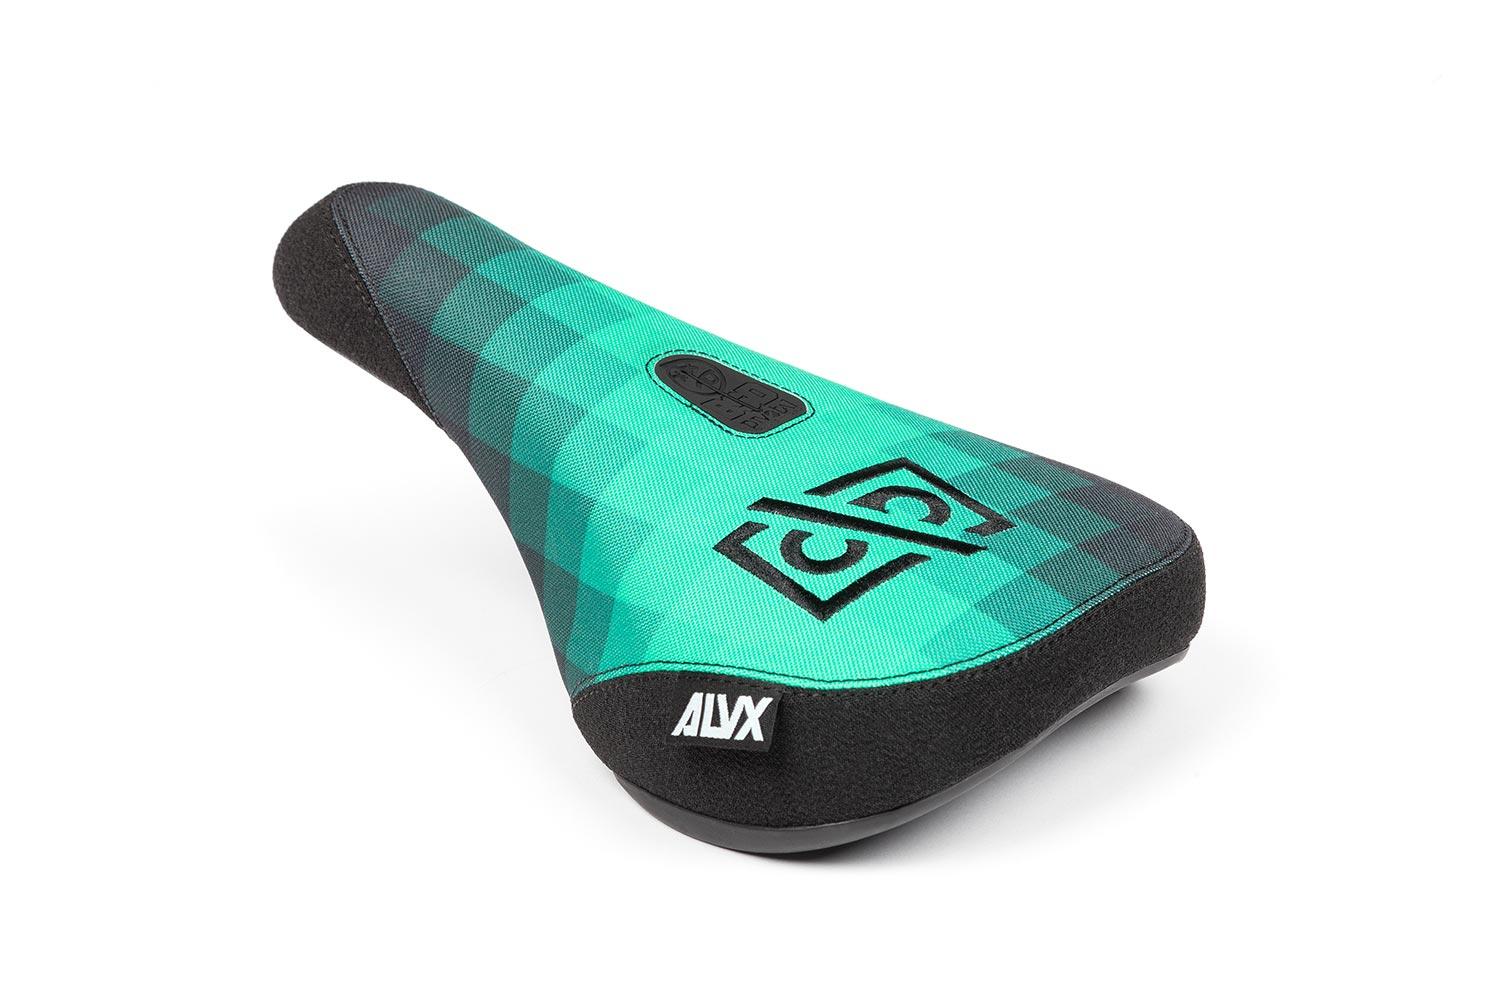 BSD ALVX Eject seats are available in VX Glitch, VX Feedback and Black